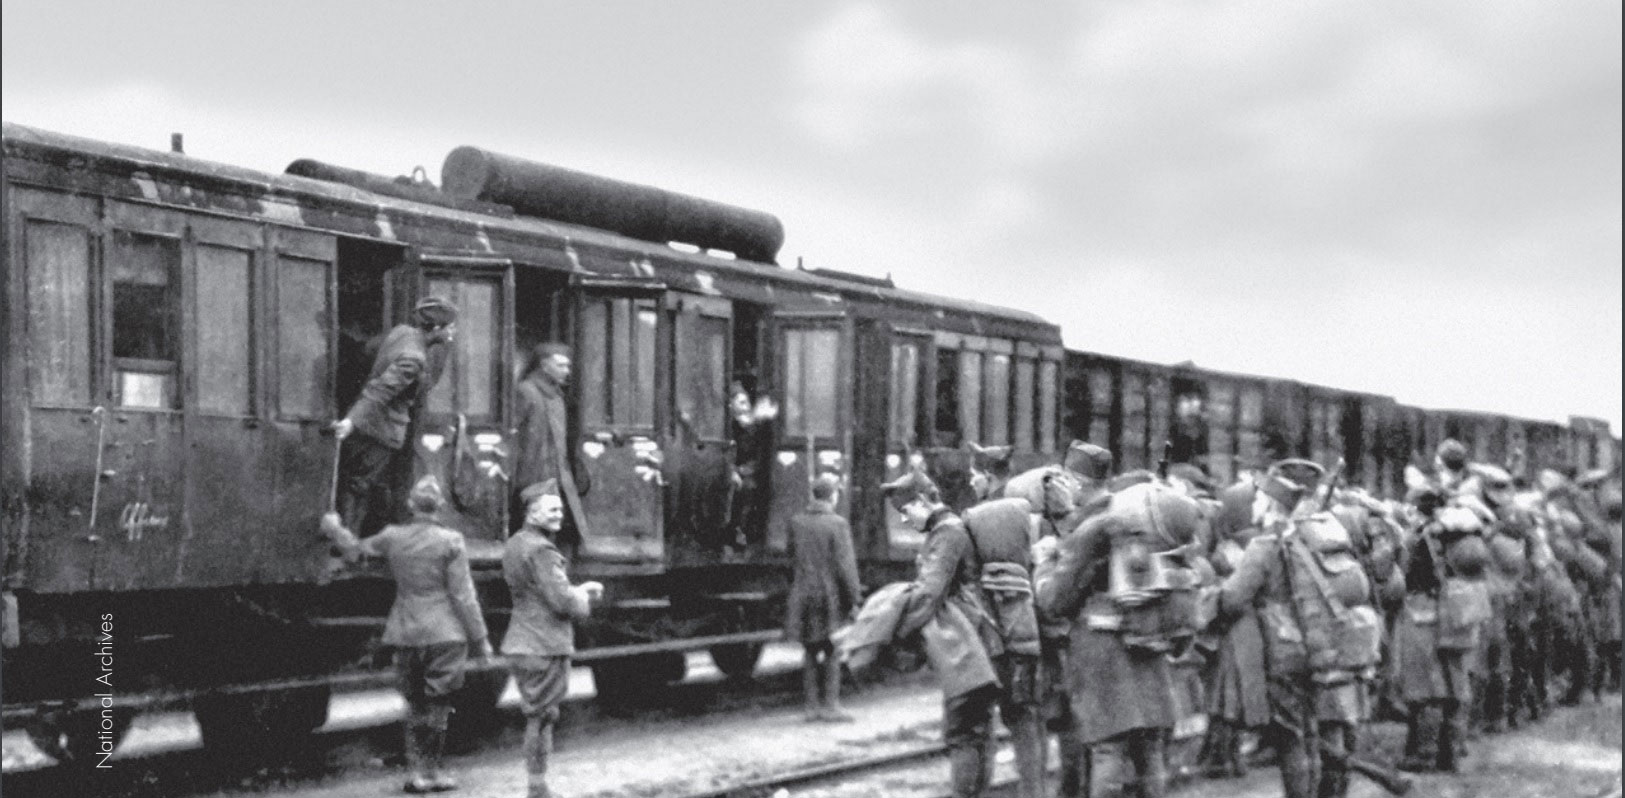 Troops board a train to a port of embarkation, 7 January 1919.